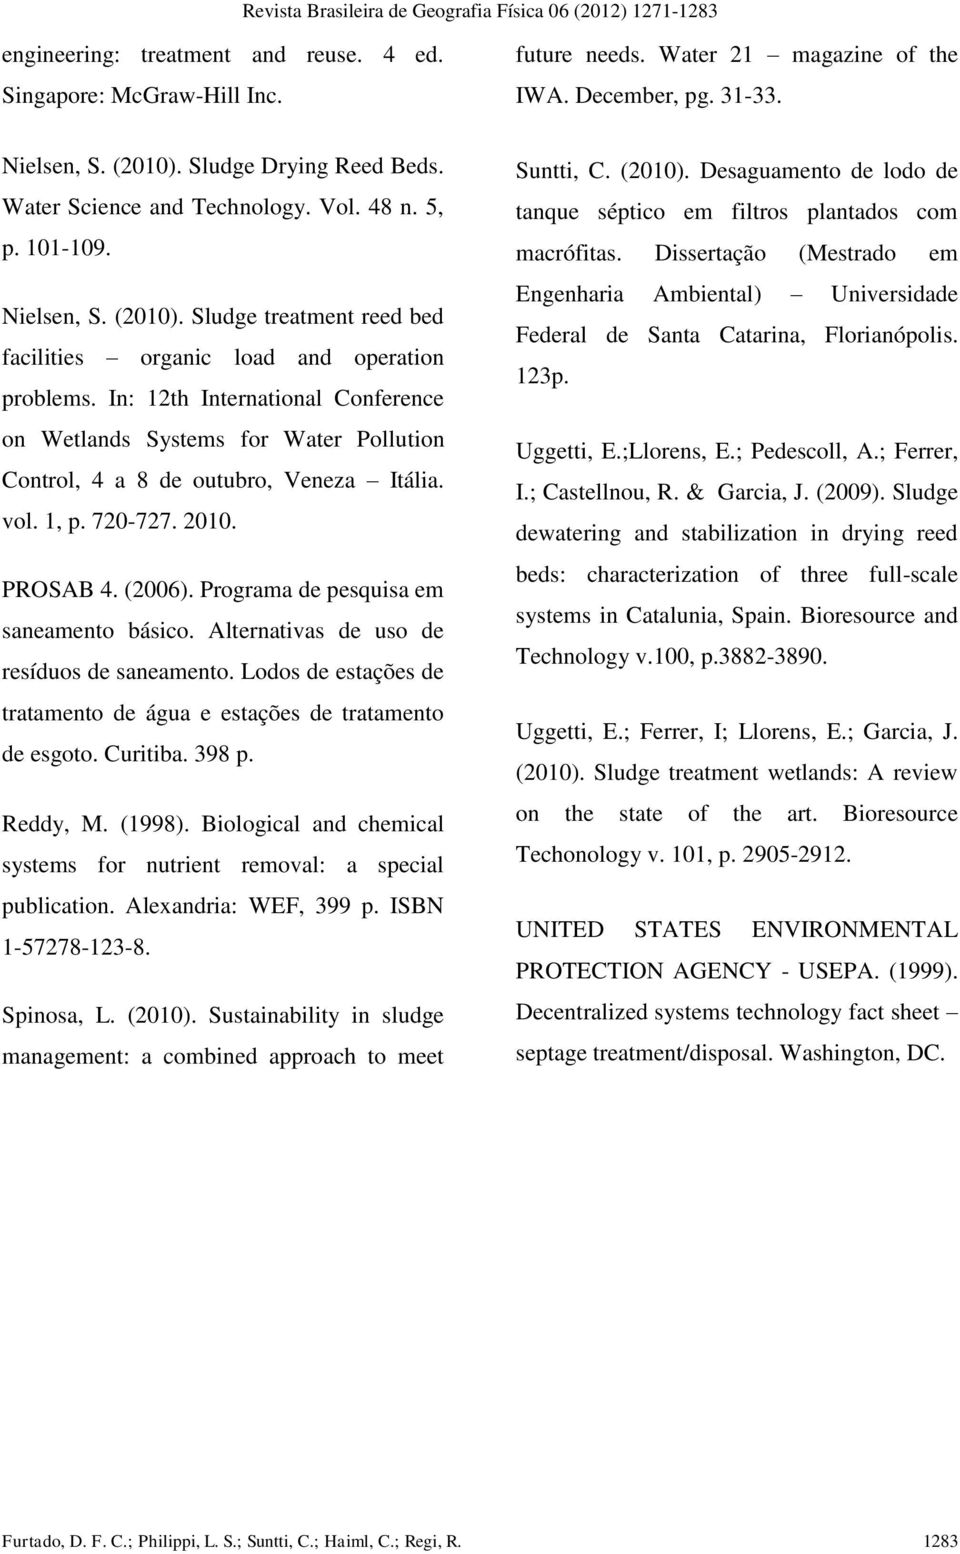 In: 12th International Conference on Wetlands Systems for Water Pollution Control, 4 a 8 de outubro, Veneza Itália. vol. 1, p. 720-727. 2010. PROSAB 4. (2006).